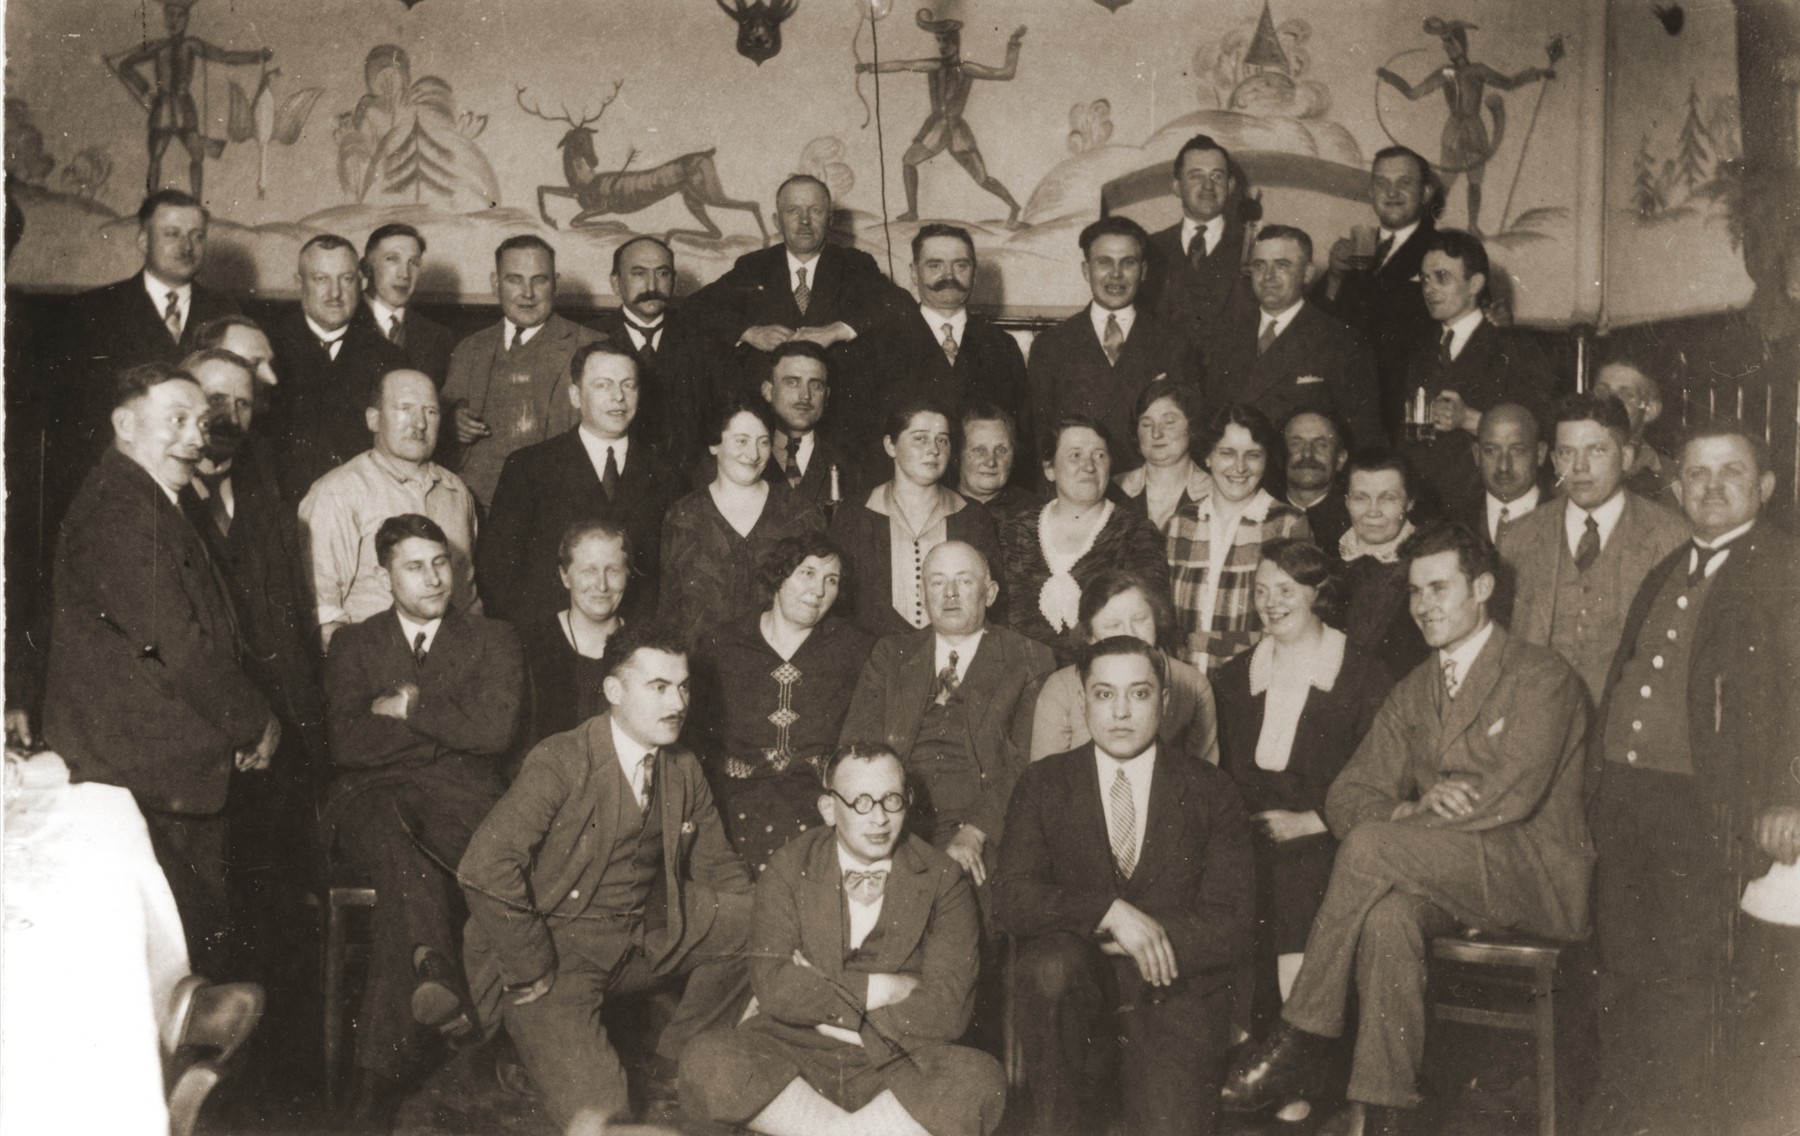 Members of a manual workers union in Gartenblum, Germany.

Pictured in the first row, middle with glasses is Lothar Erlanger.  Standing in the third row, fourth and fifth from the left are Leo and Friedel Fraenkel.